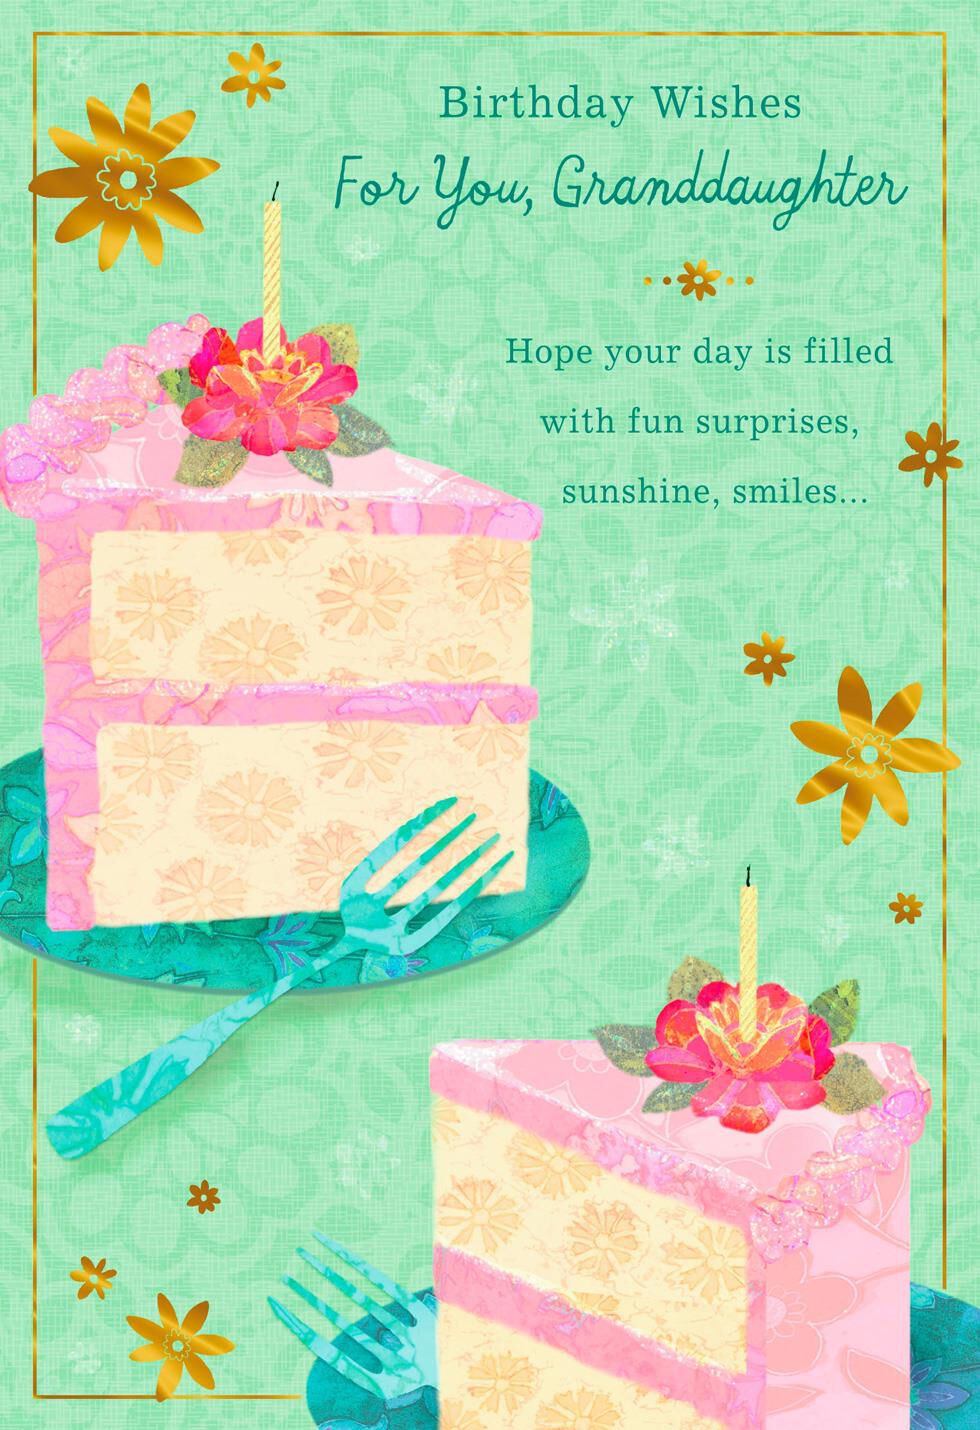 Pink Slices of Cake Birthday Card for Granddaughter - Greeting Cards